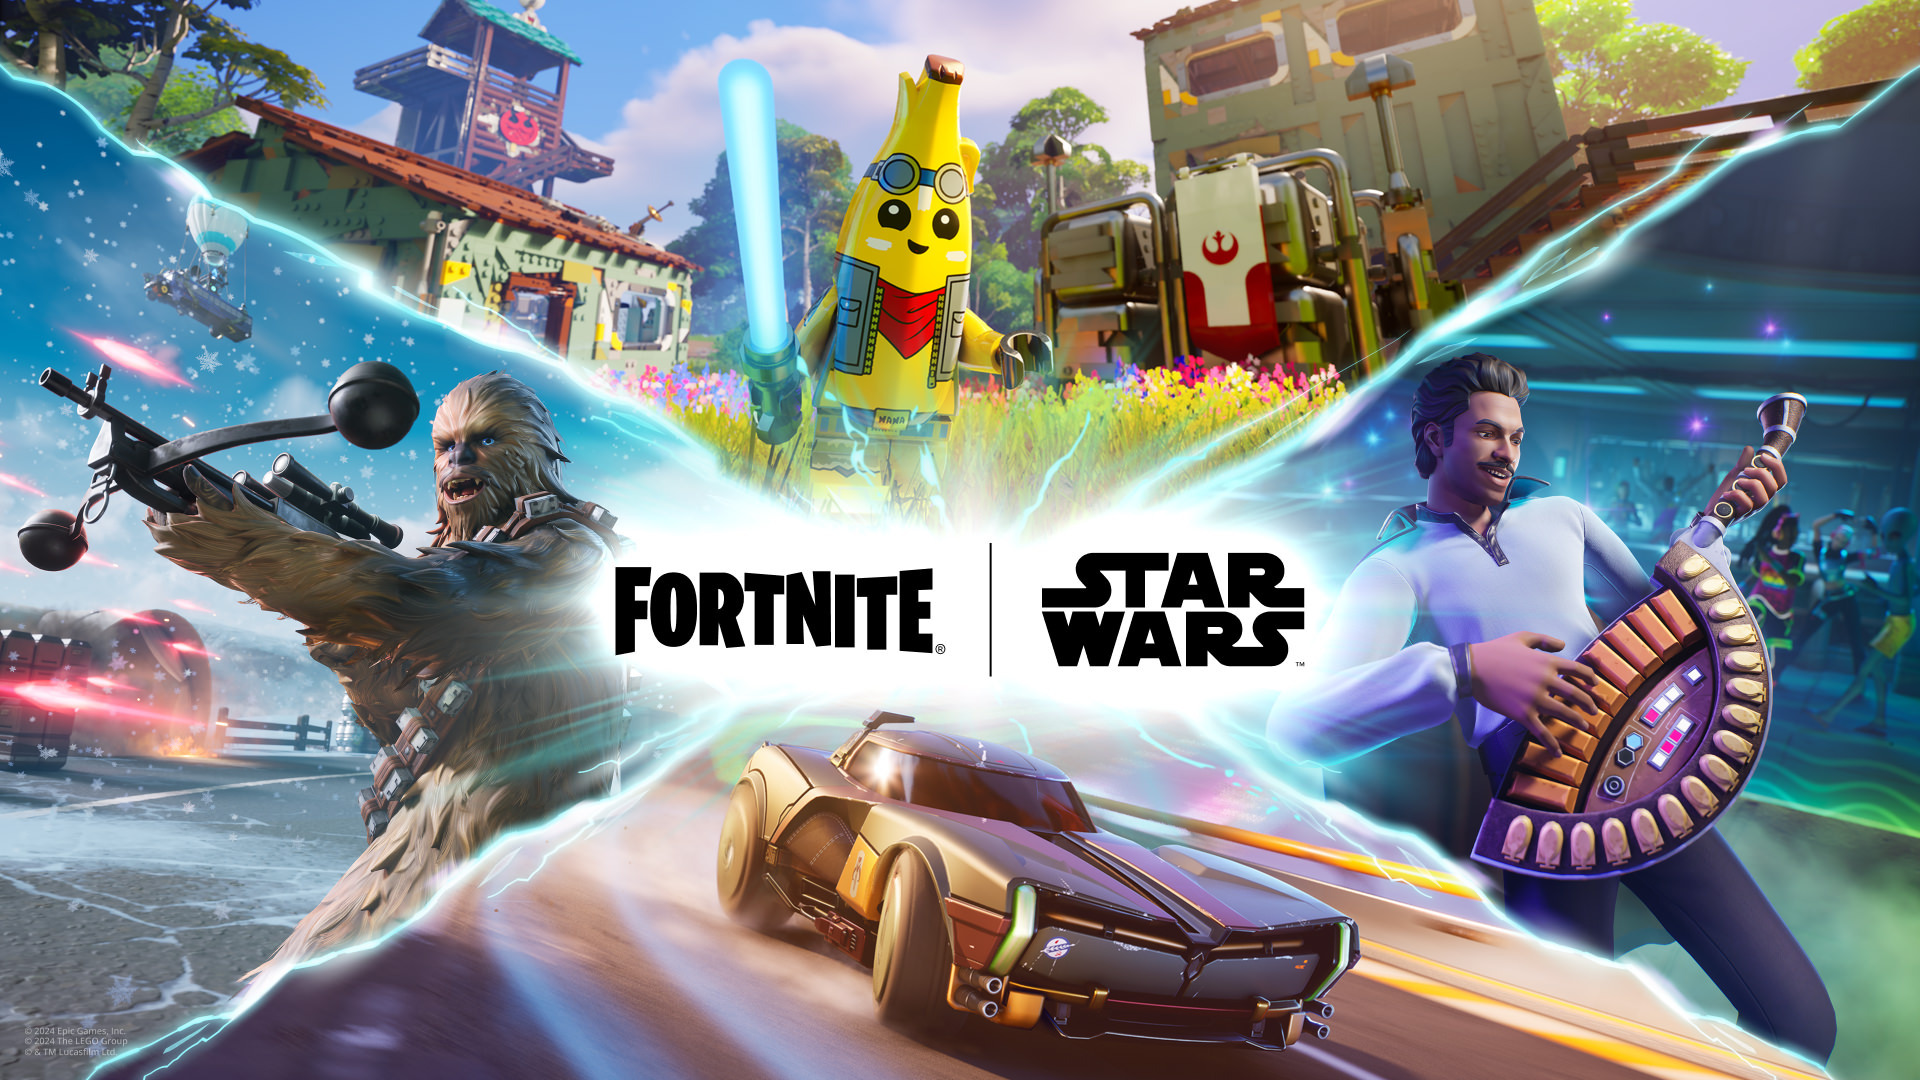 May the 4th be with you: Star Wars llega al videojuego Fortnite